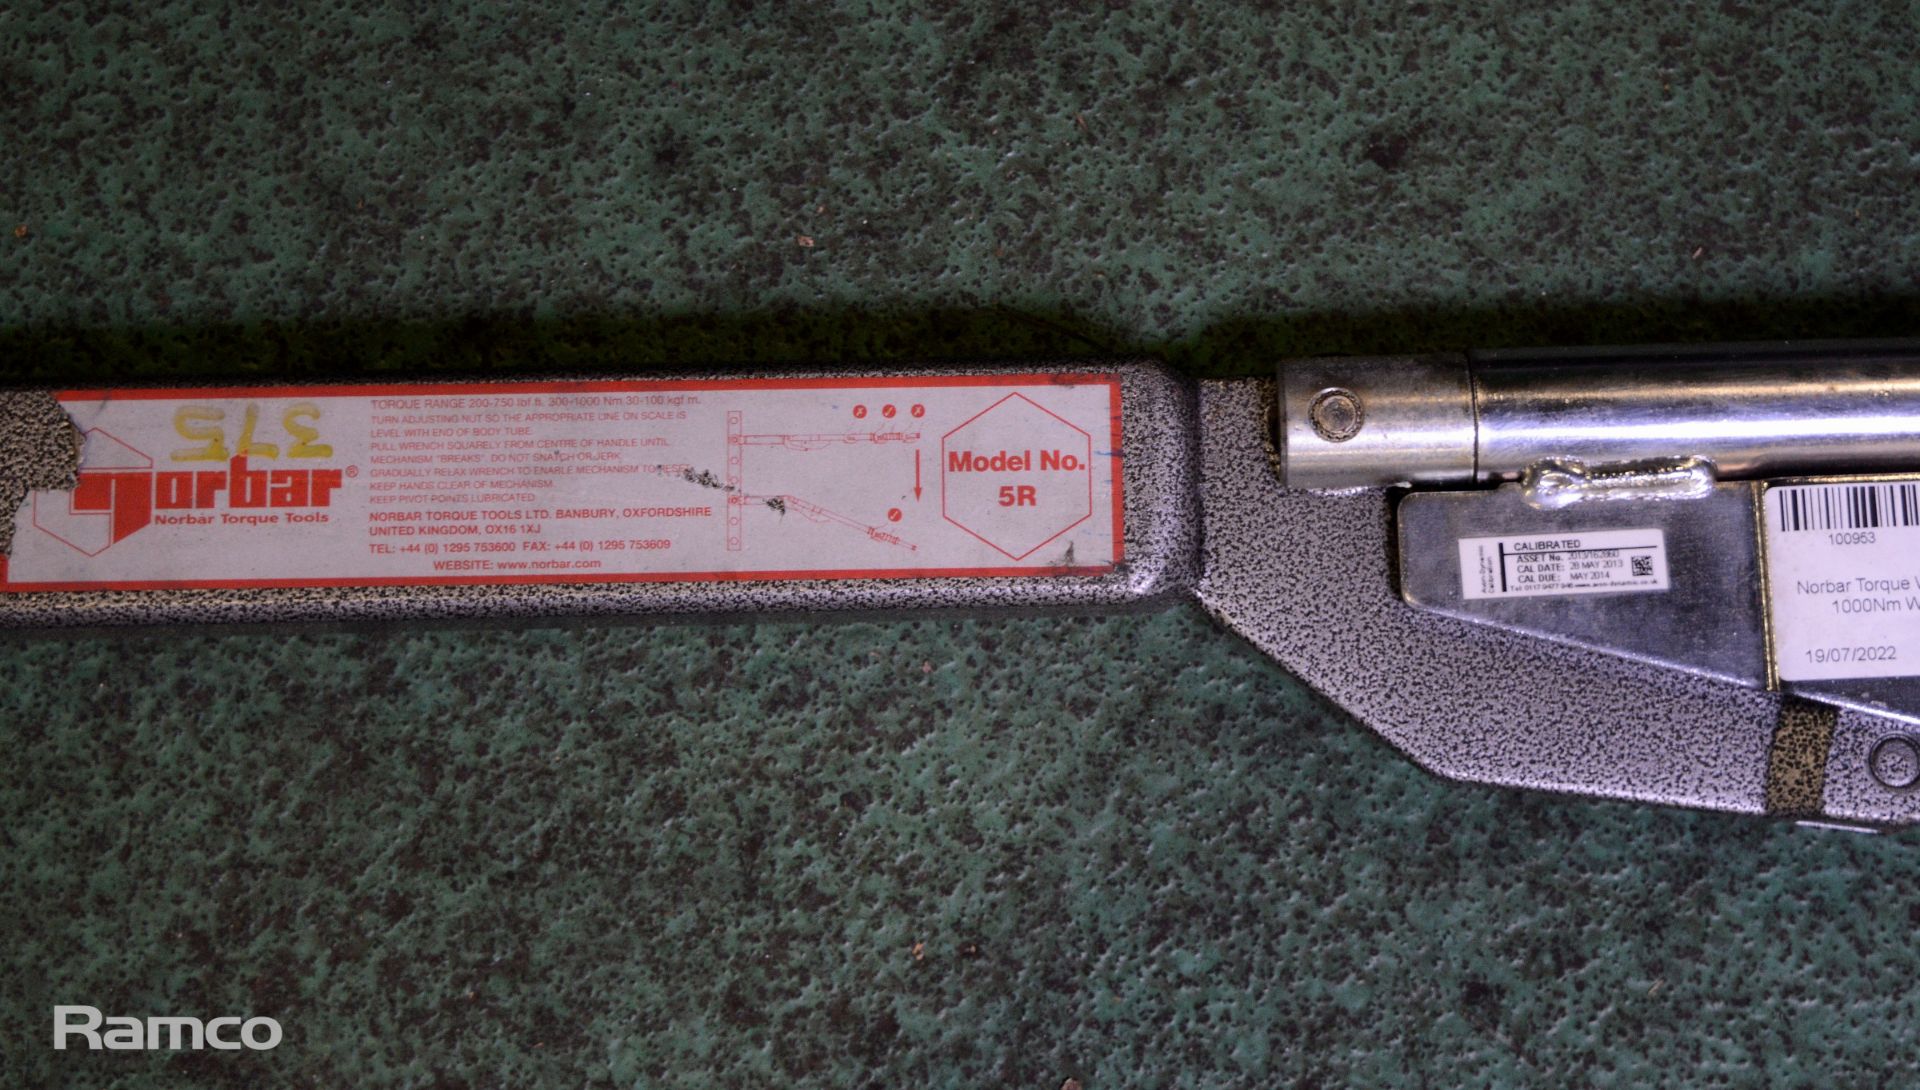 Norbar Torque Wrench 300-1000Nm With Case - Image 3 of 3